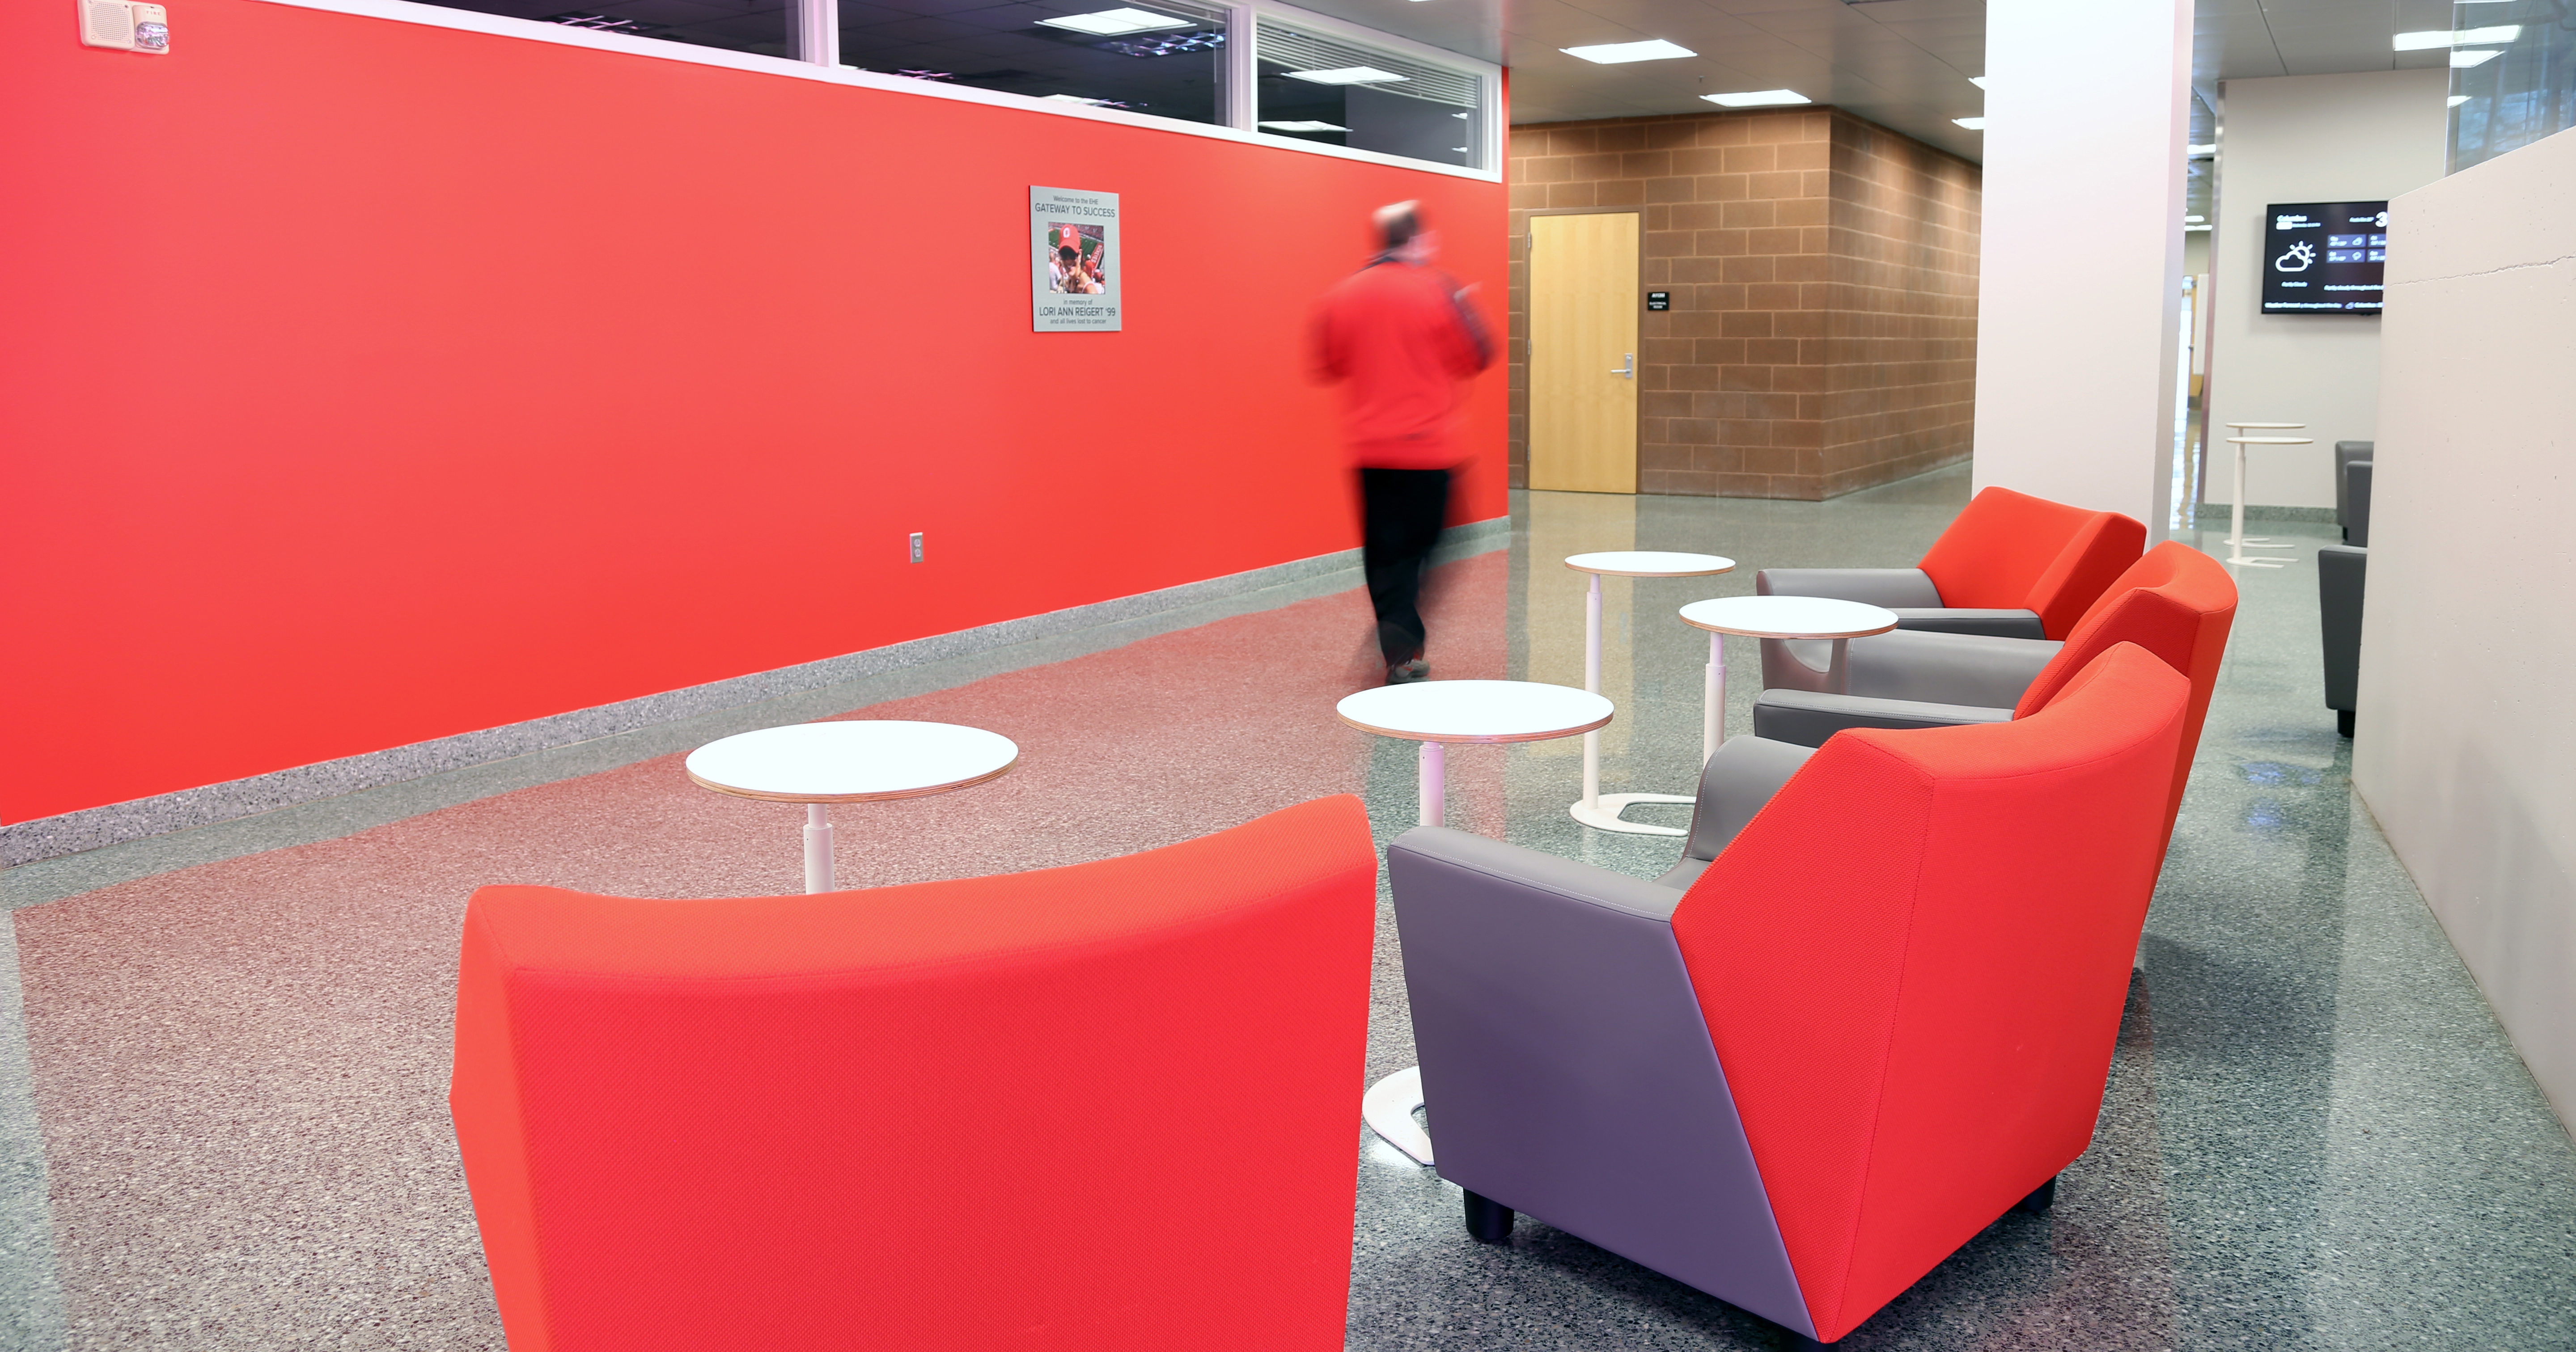 The Gateway to Success seating for students